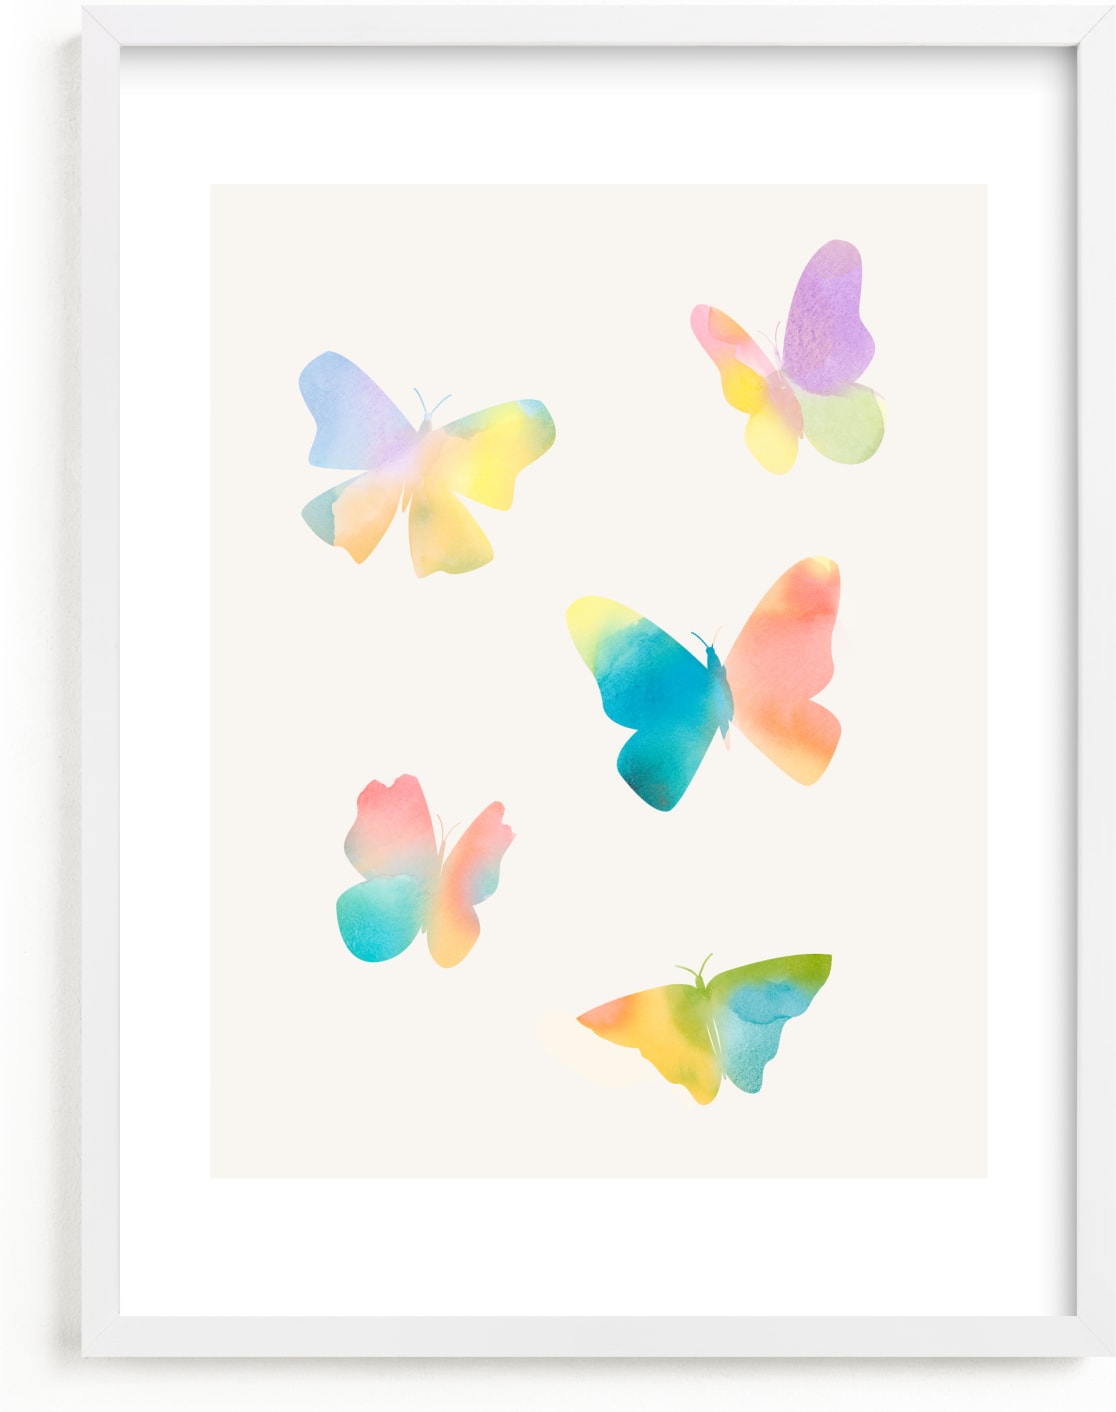 This is a blue kids wall art by Lindsay Megahed called Watercolor butterflies.